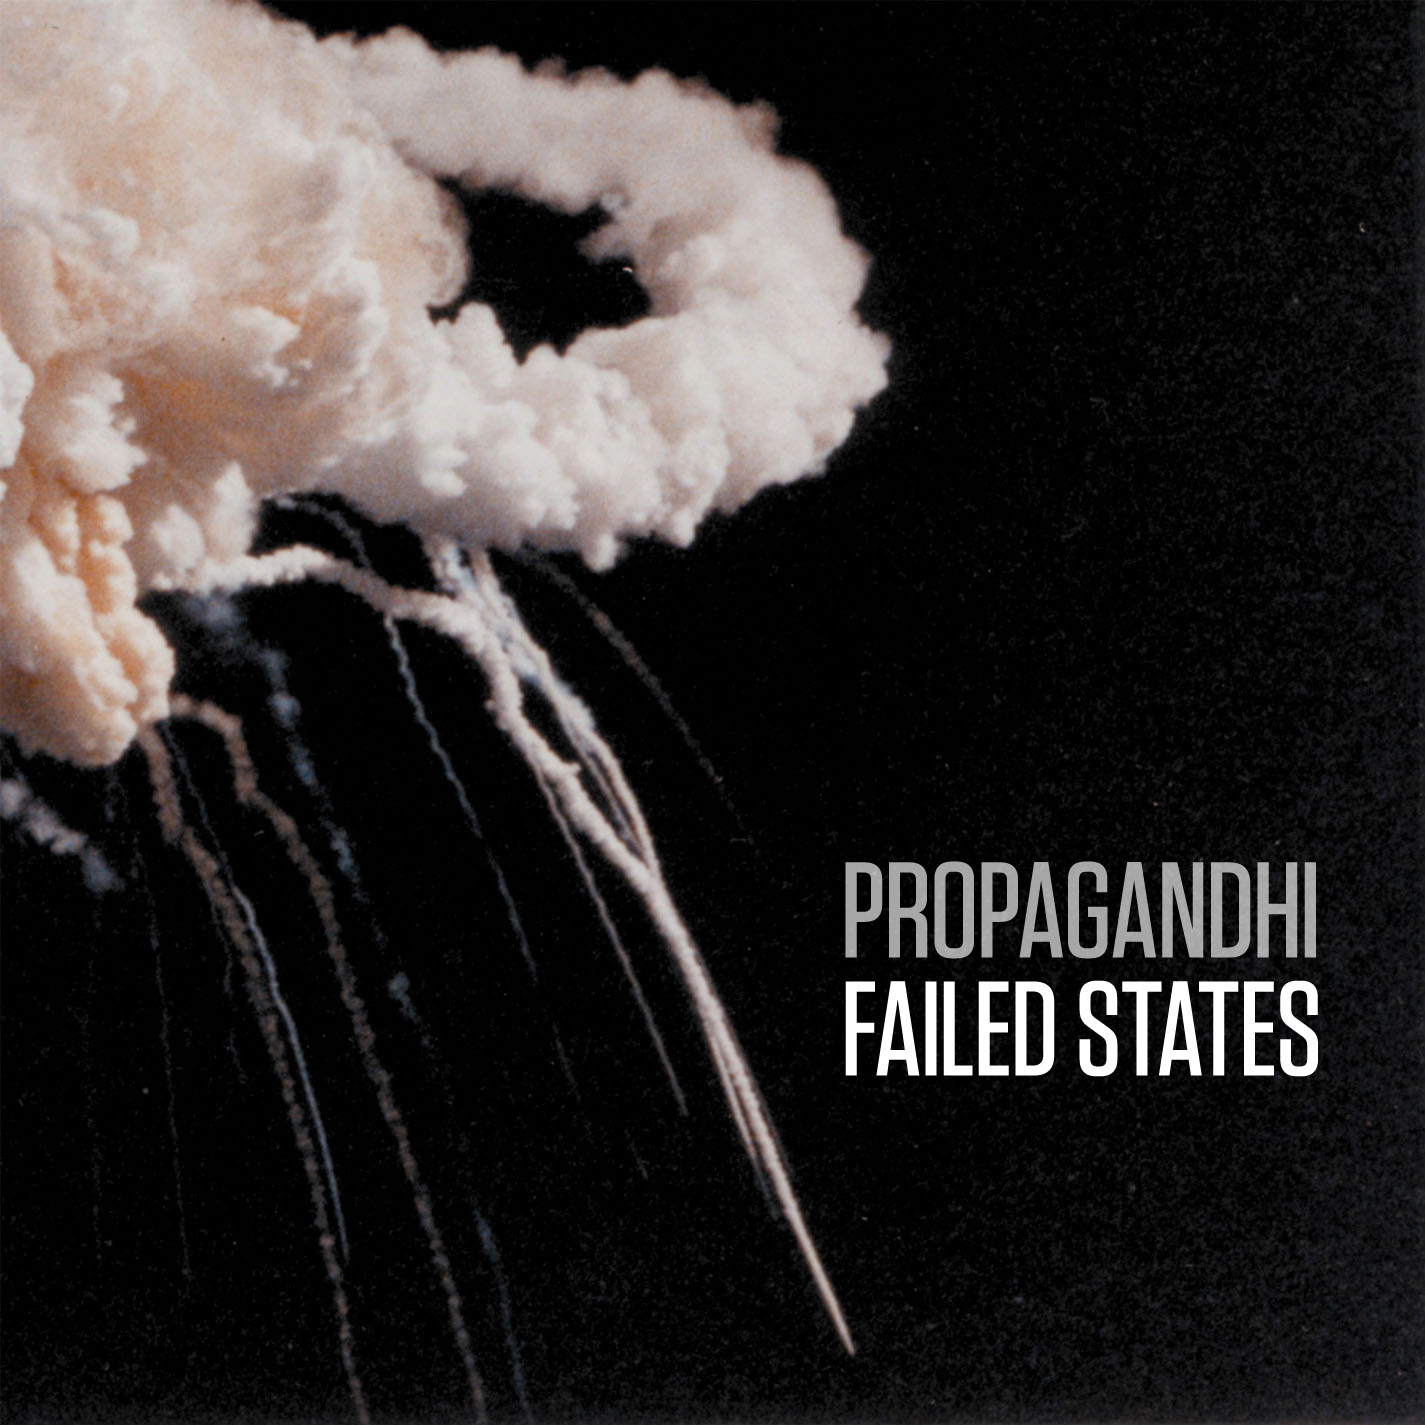 Propagandhi premiere new song from upcoming album Failed States